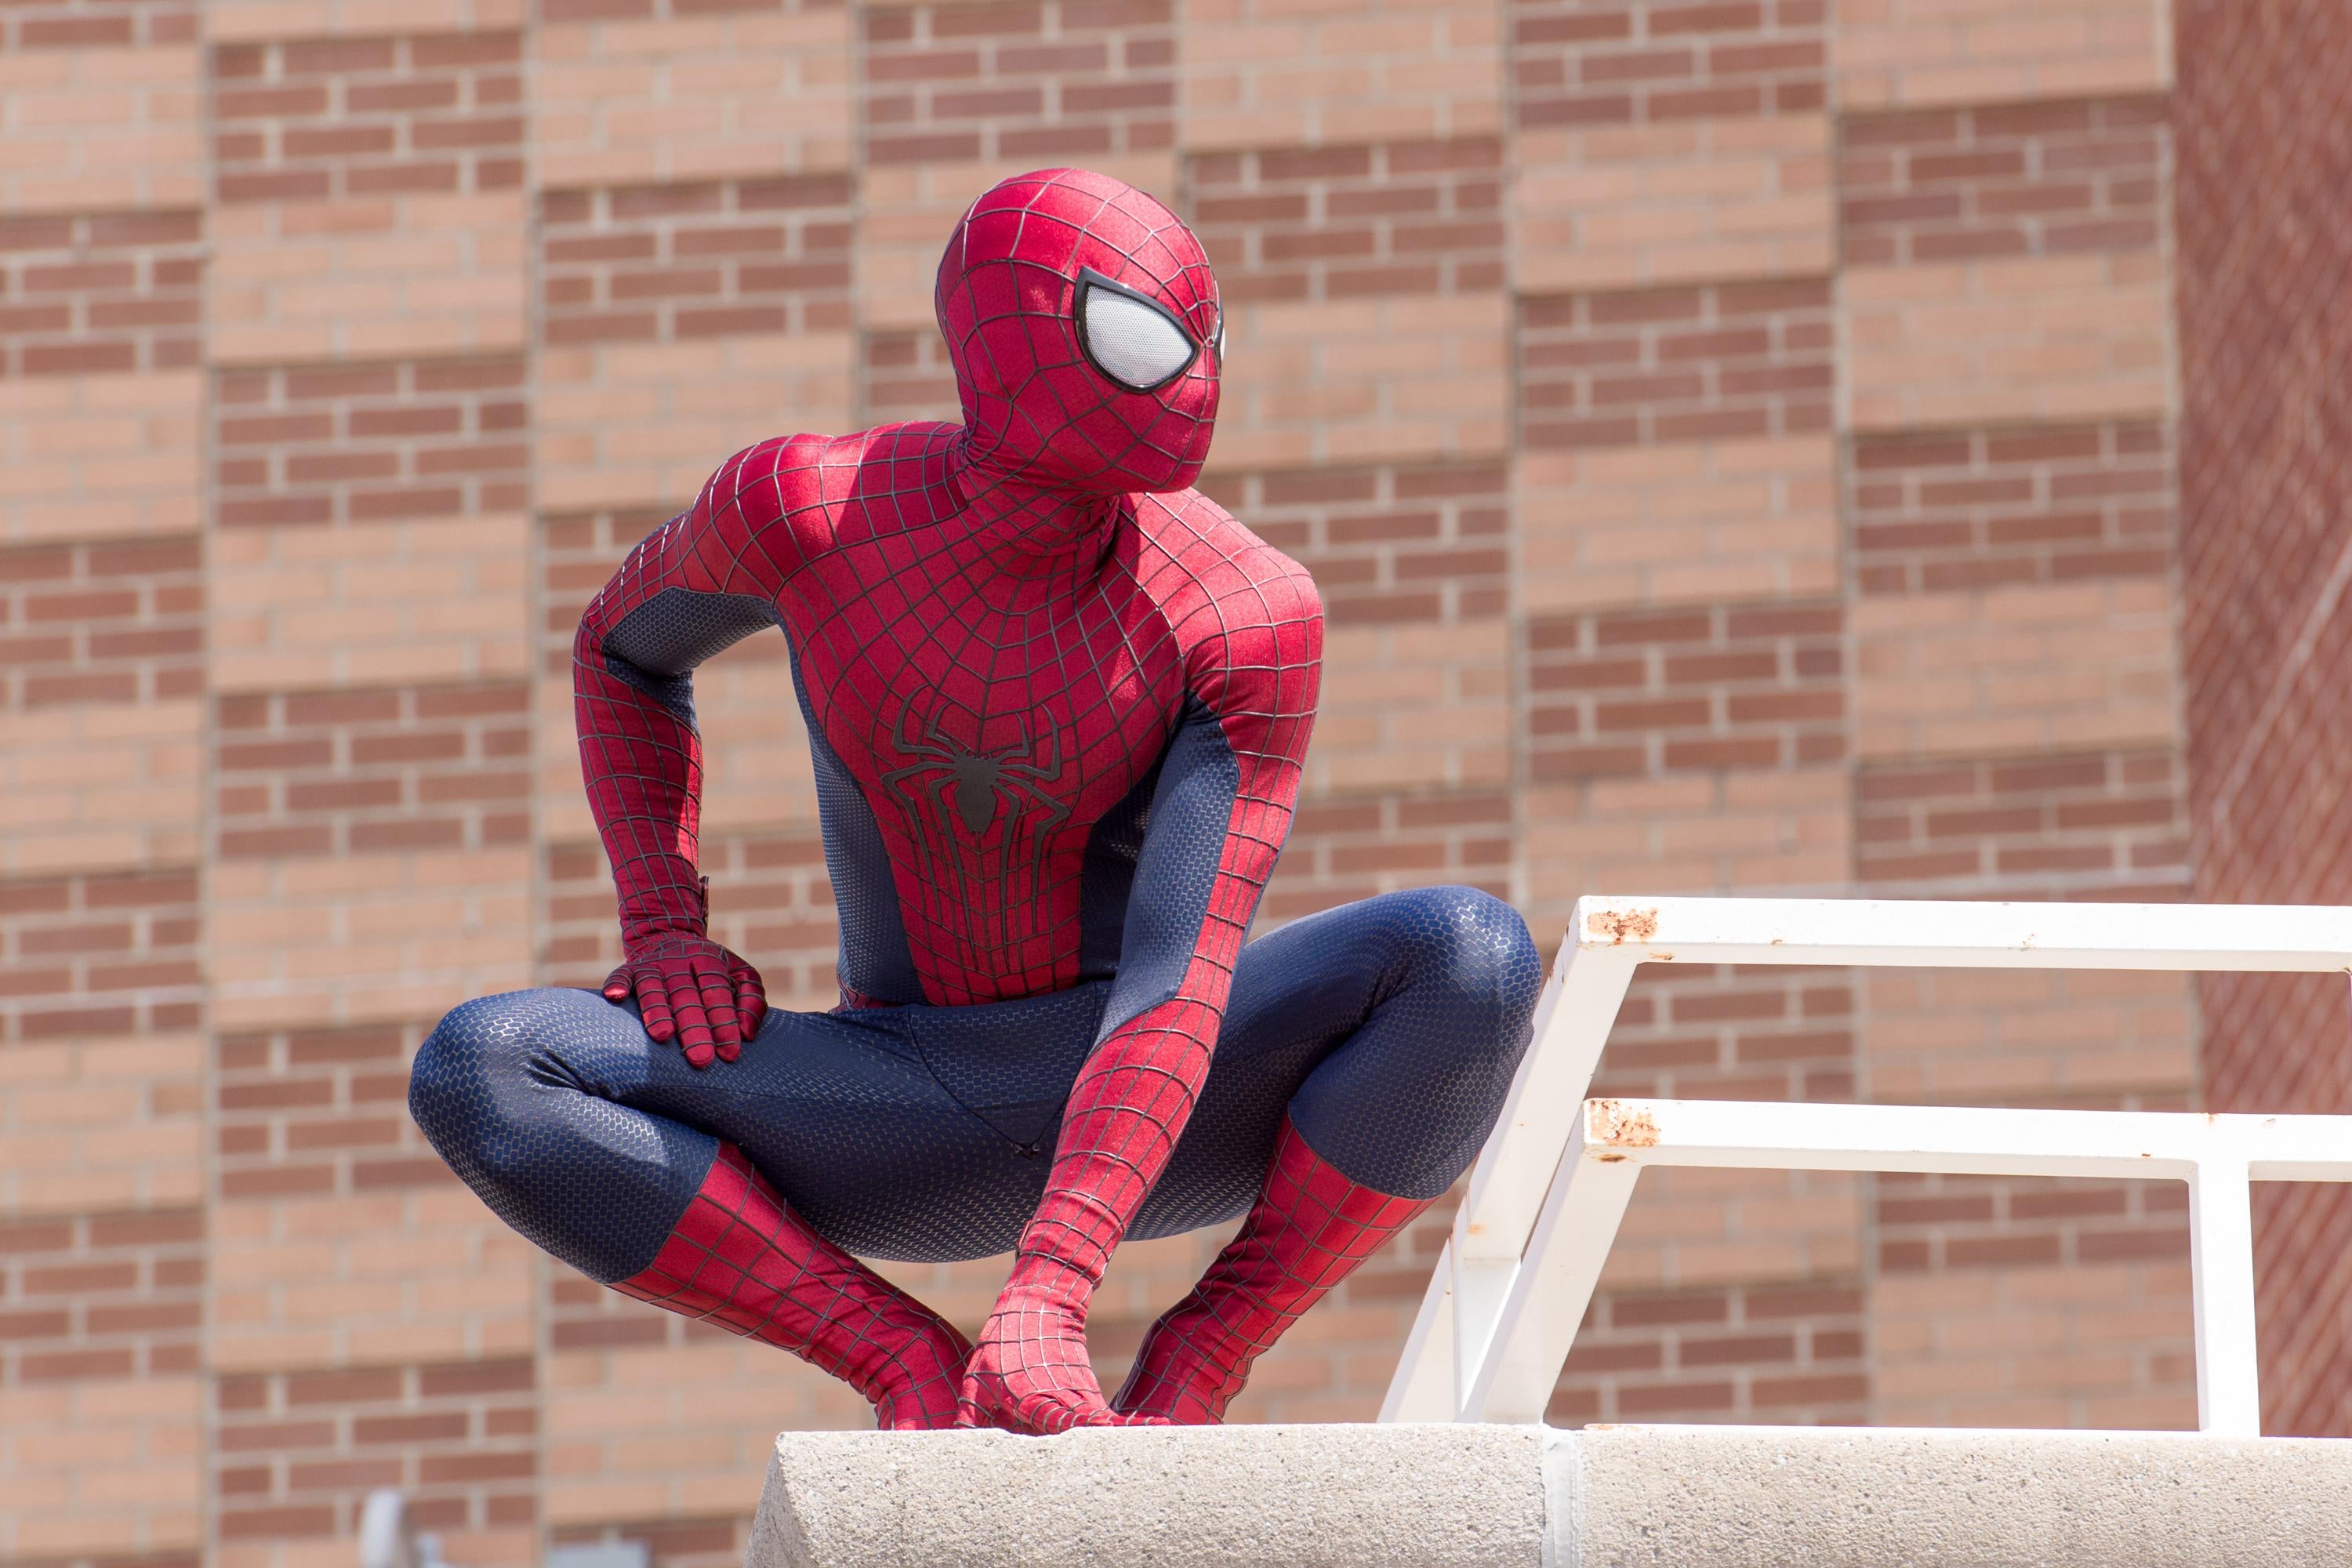 Spider-Man crouched atop a building.